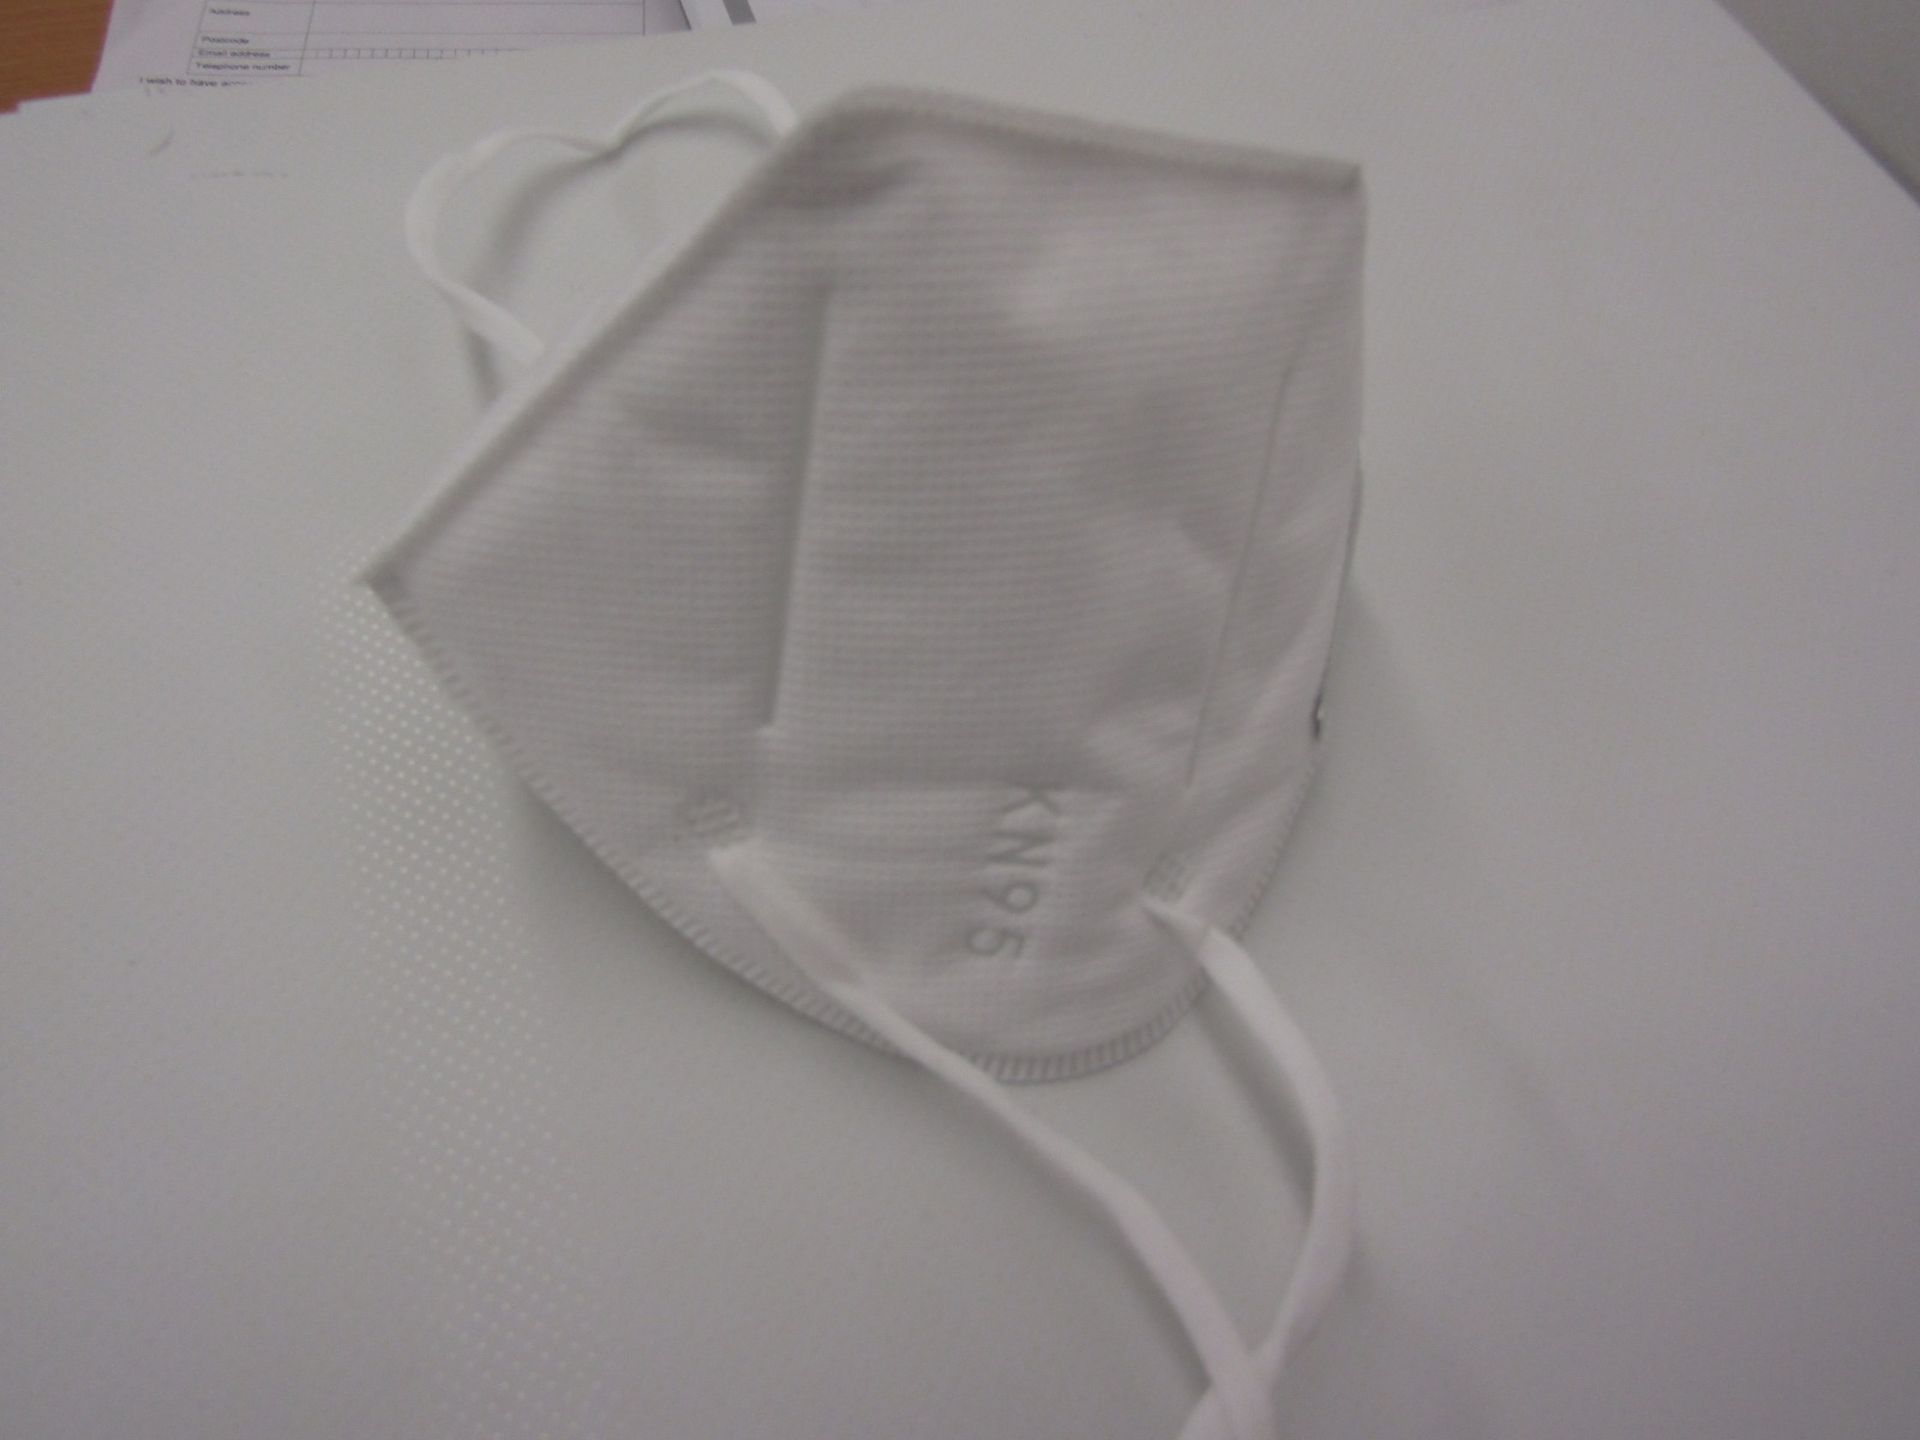 5000 KN95 FILTERED FACE MASKS, BRAND NEW WITH TAGS AND CE MARK CERTIFIED *PLUS VAT* - Image 6 of 7